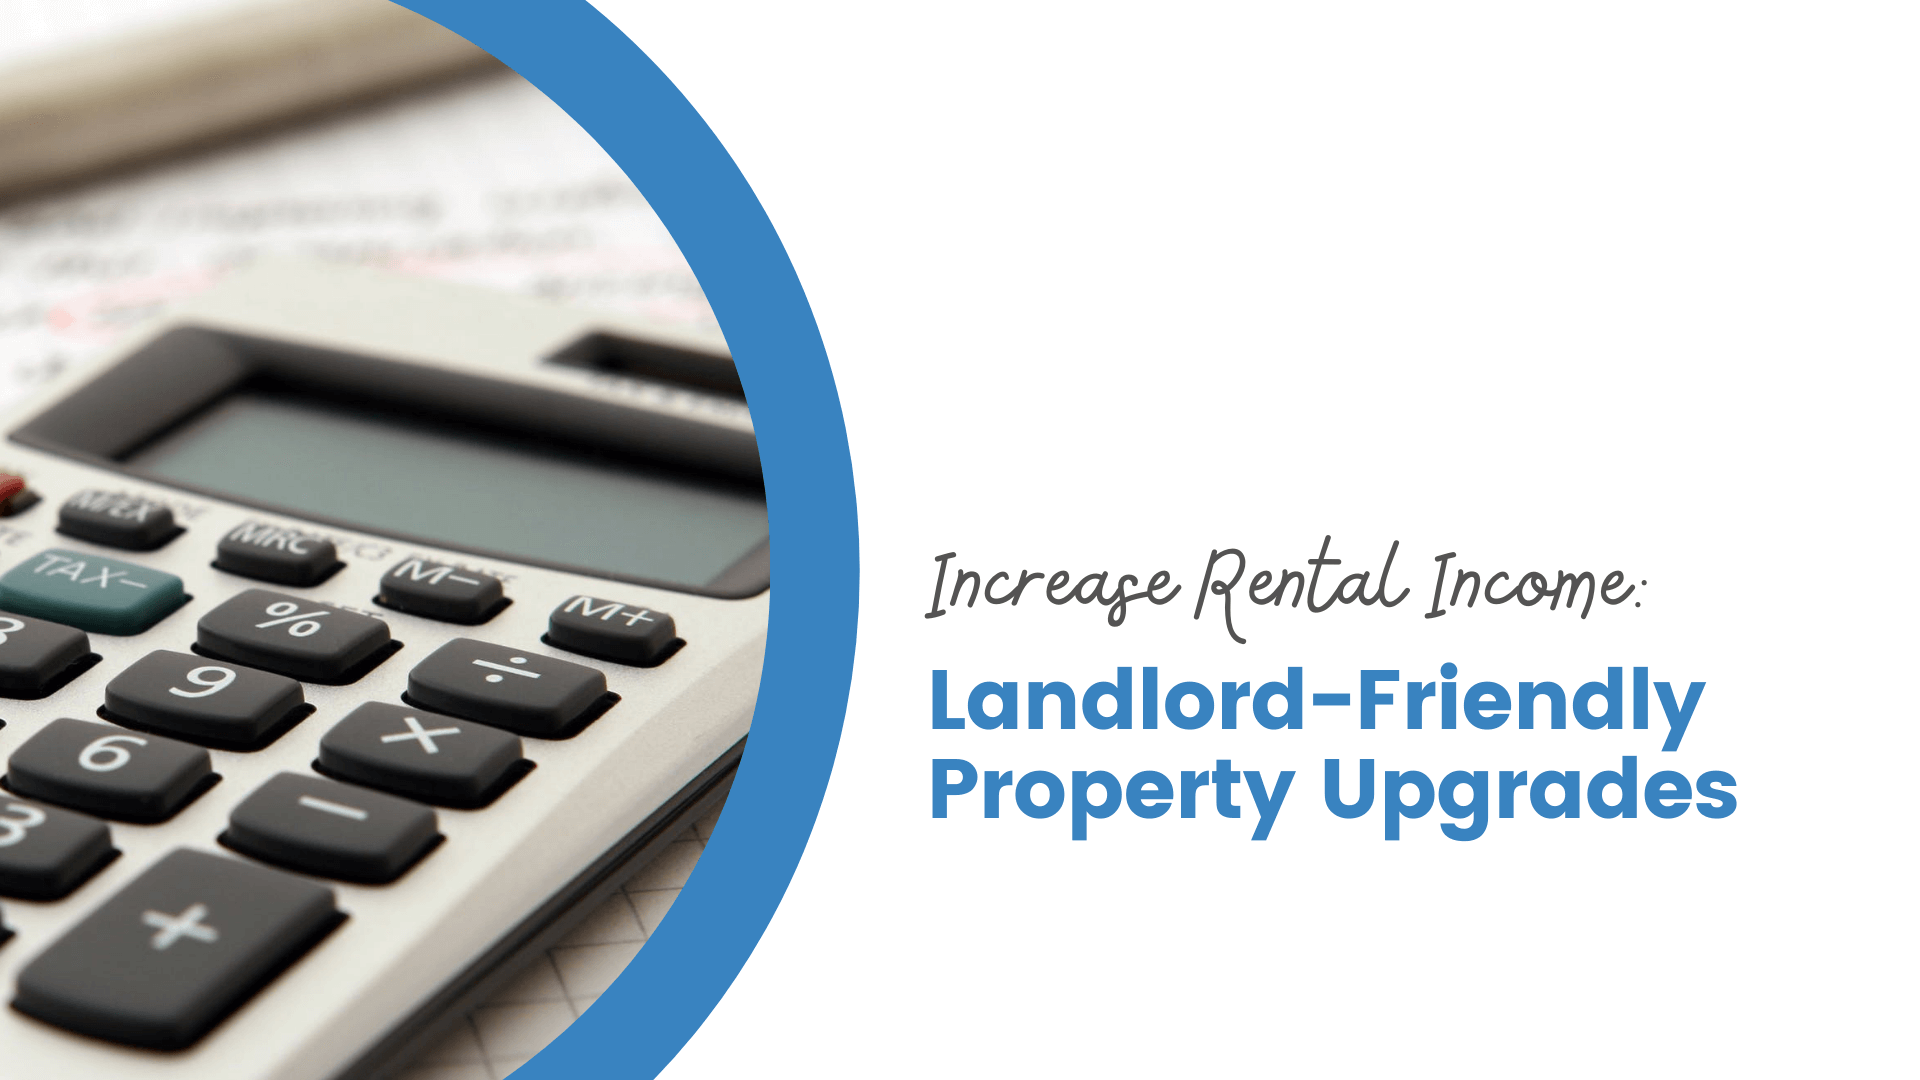 Landlord-Friendly Property Upgrades that will Increase Rental Income - article banner